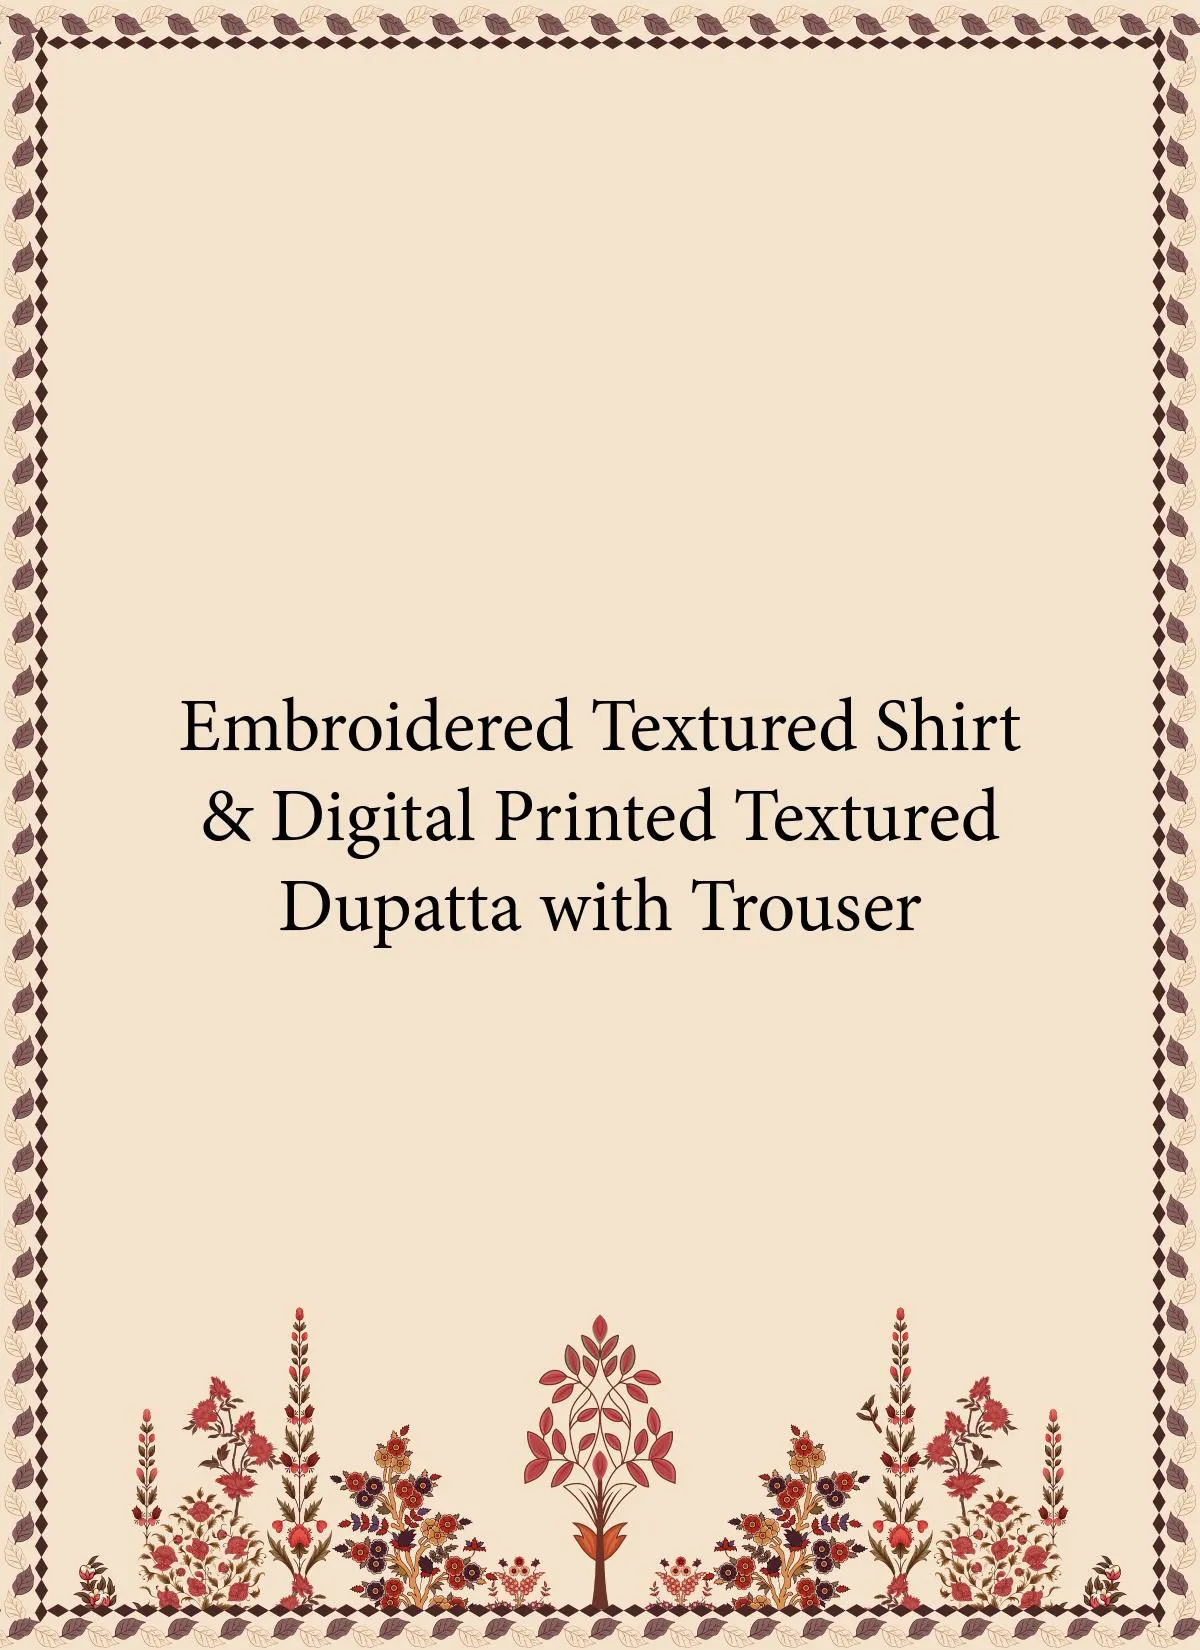 embroidered textured shirt and digital printed texture dupatta with trouser